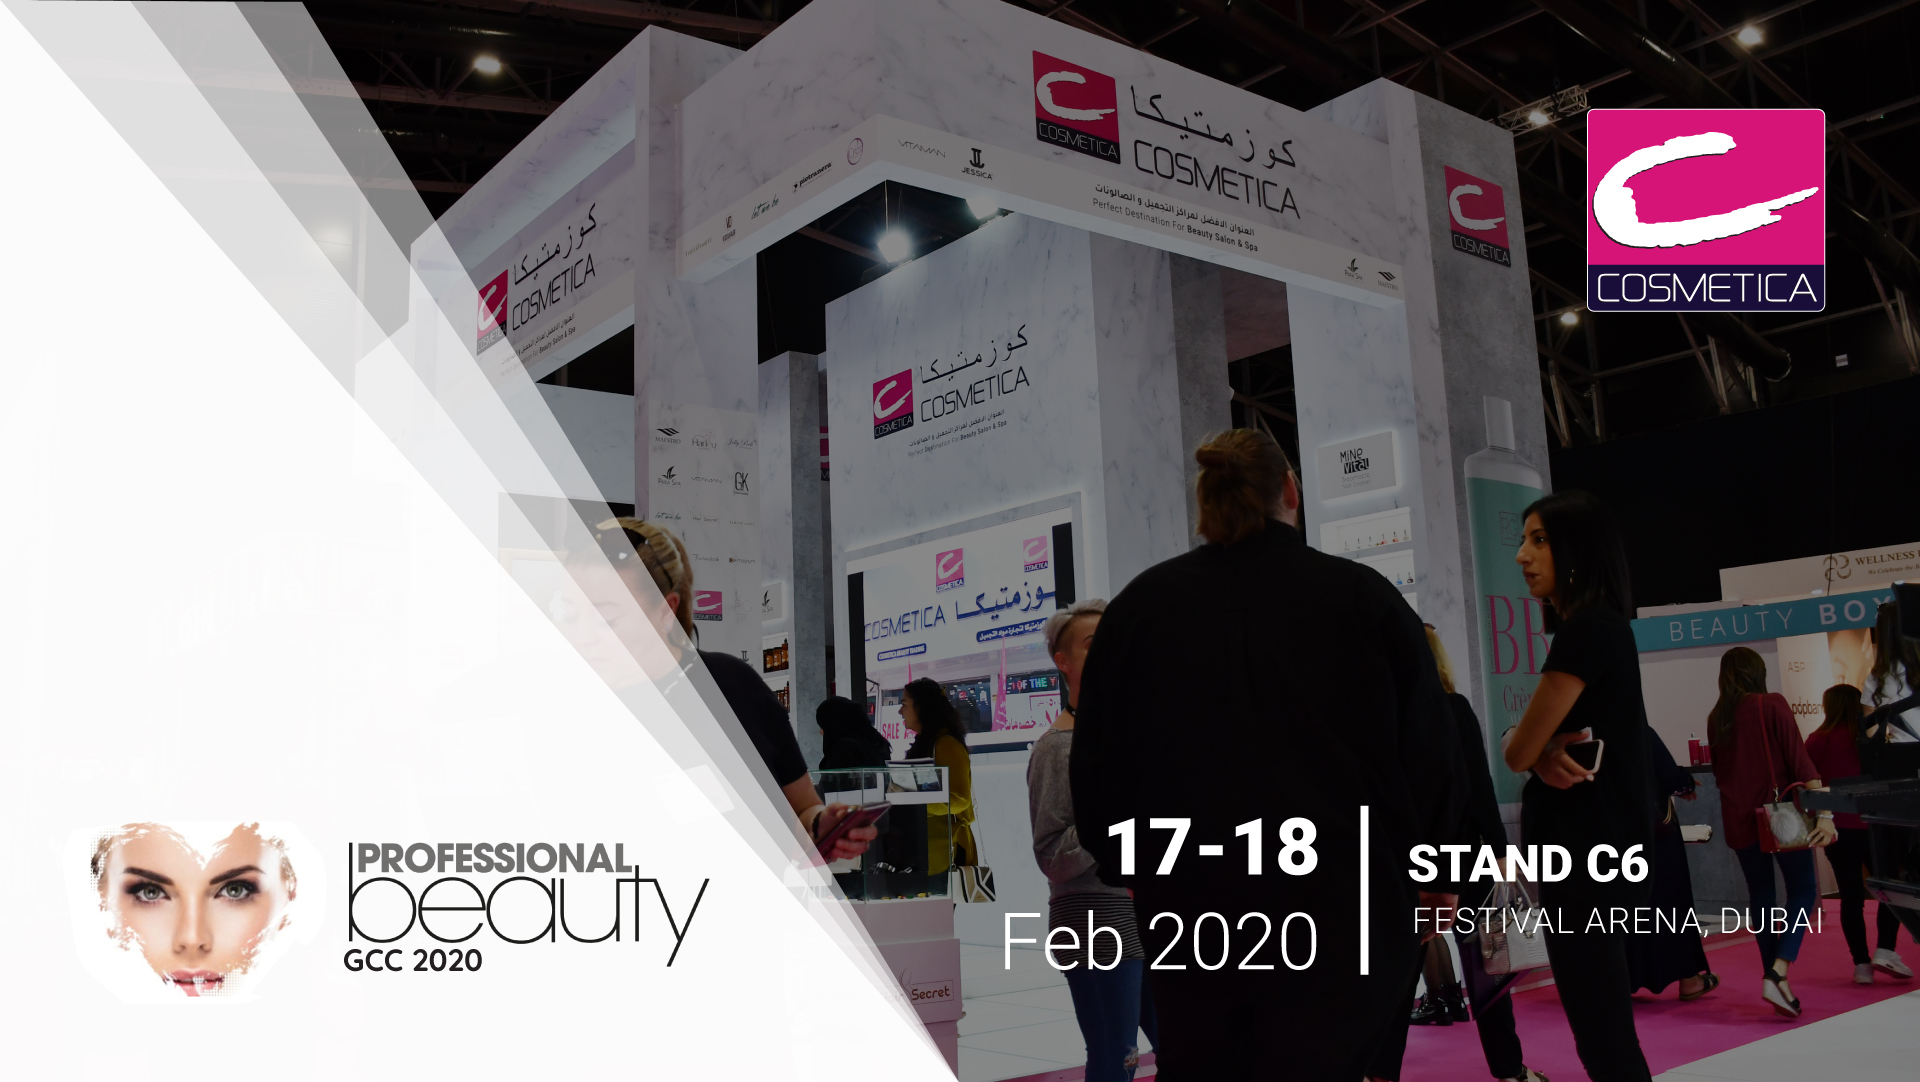 Successfully participated in Professional Beauty GCC 2020, Proud to be the Bronze Sponsor for the event